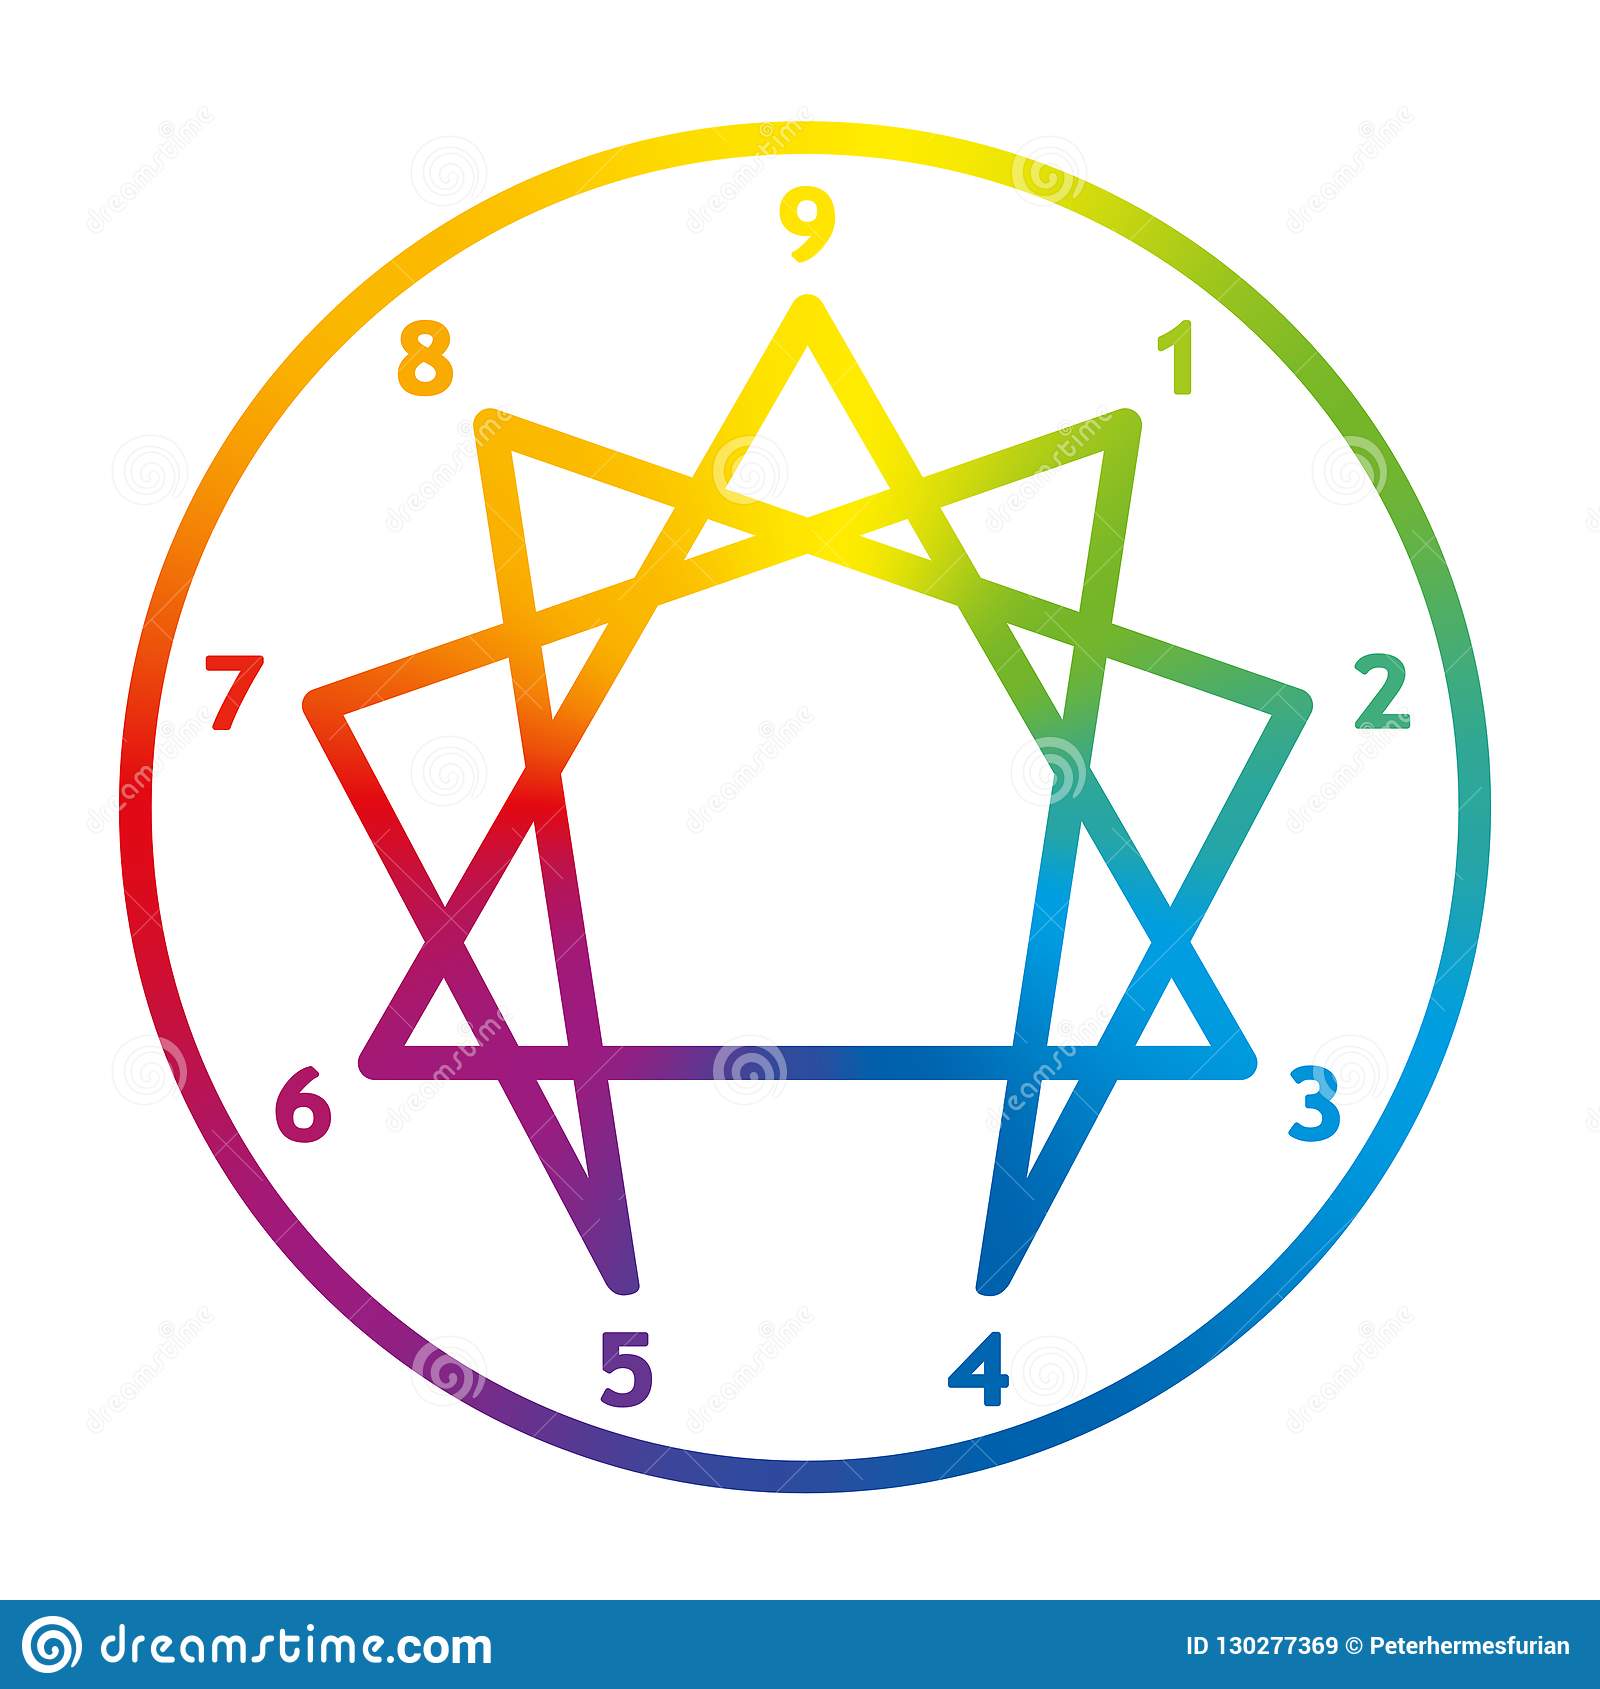 enneagram-numbers-circle-personality-ring-rainbow-colors-130277369[1]